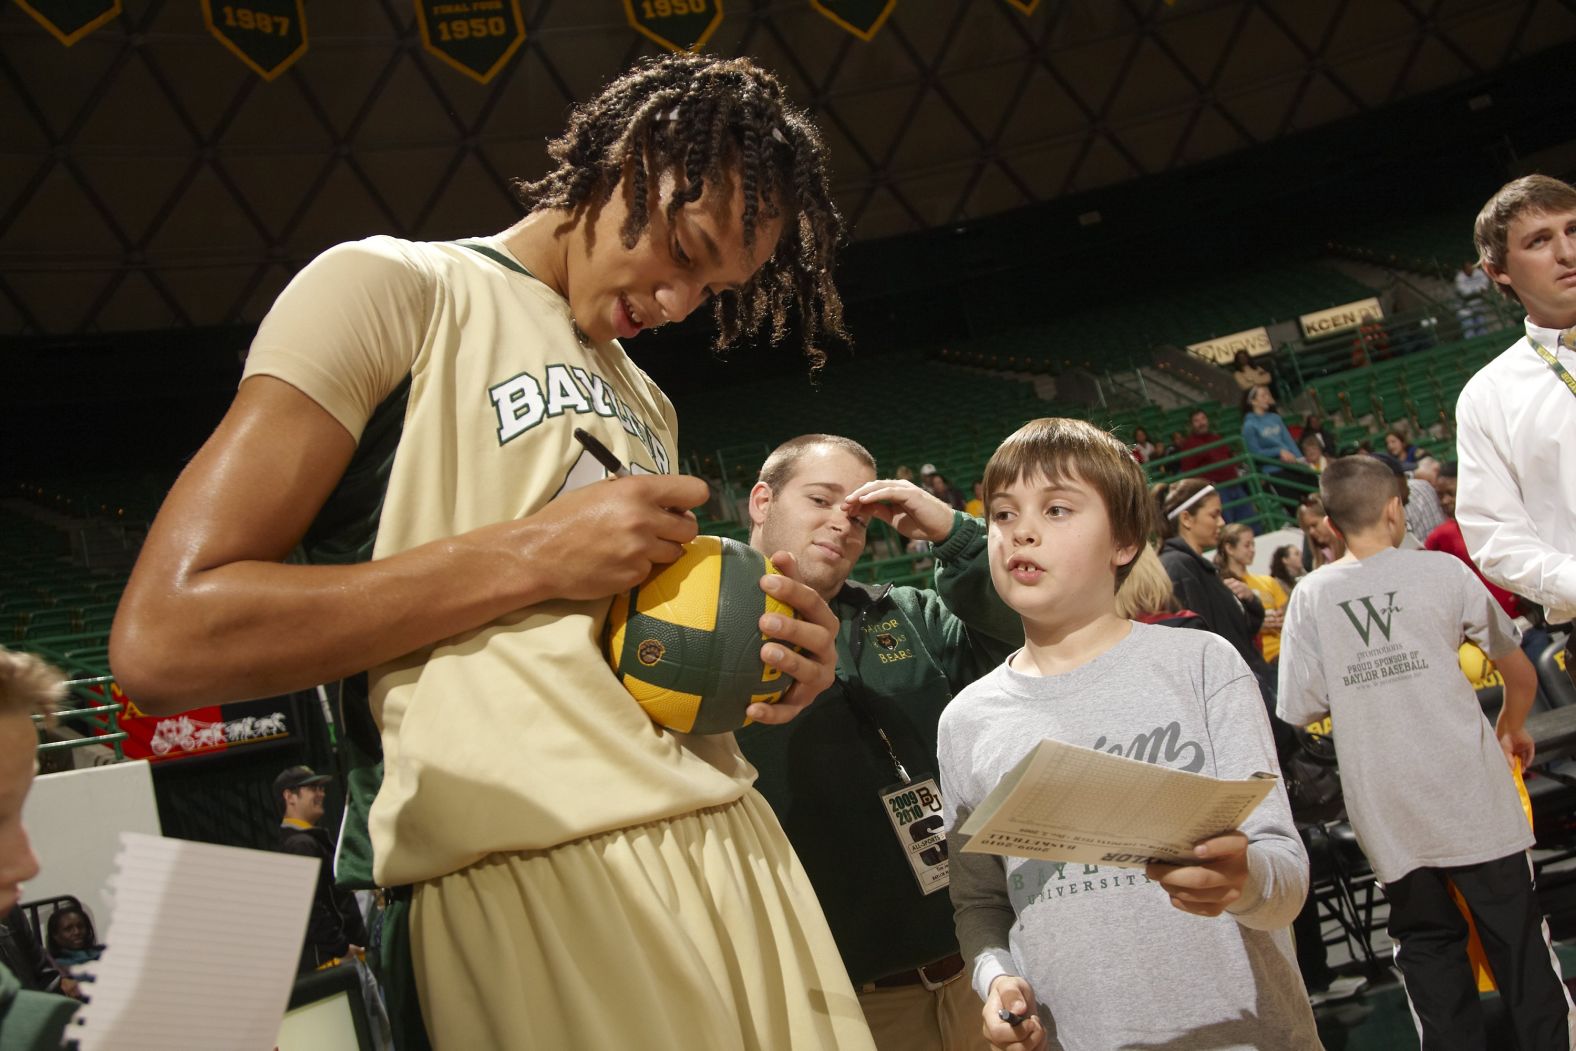 Griner signs autographs while playing for Baylor University in Waco, Texas.